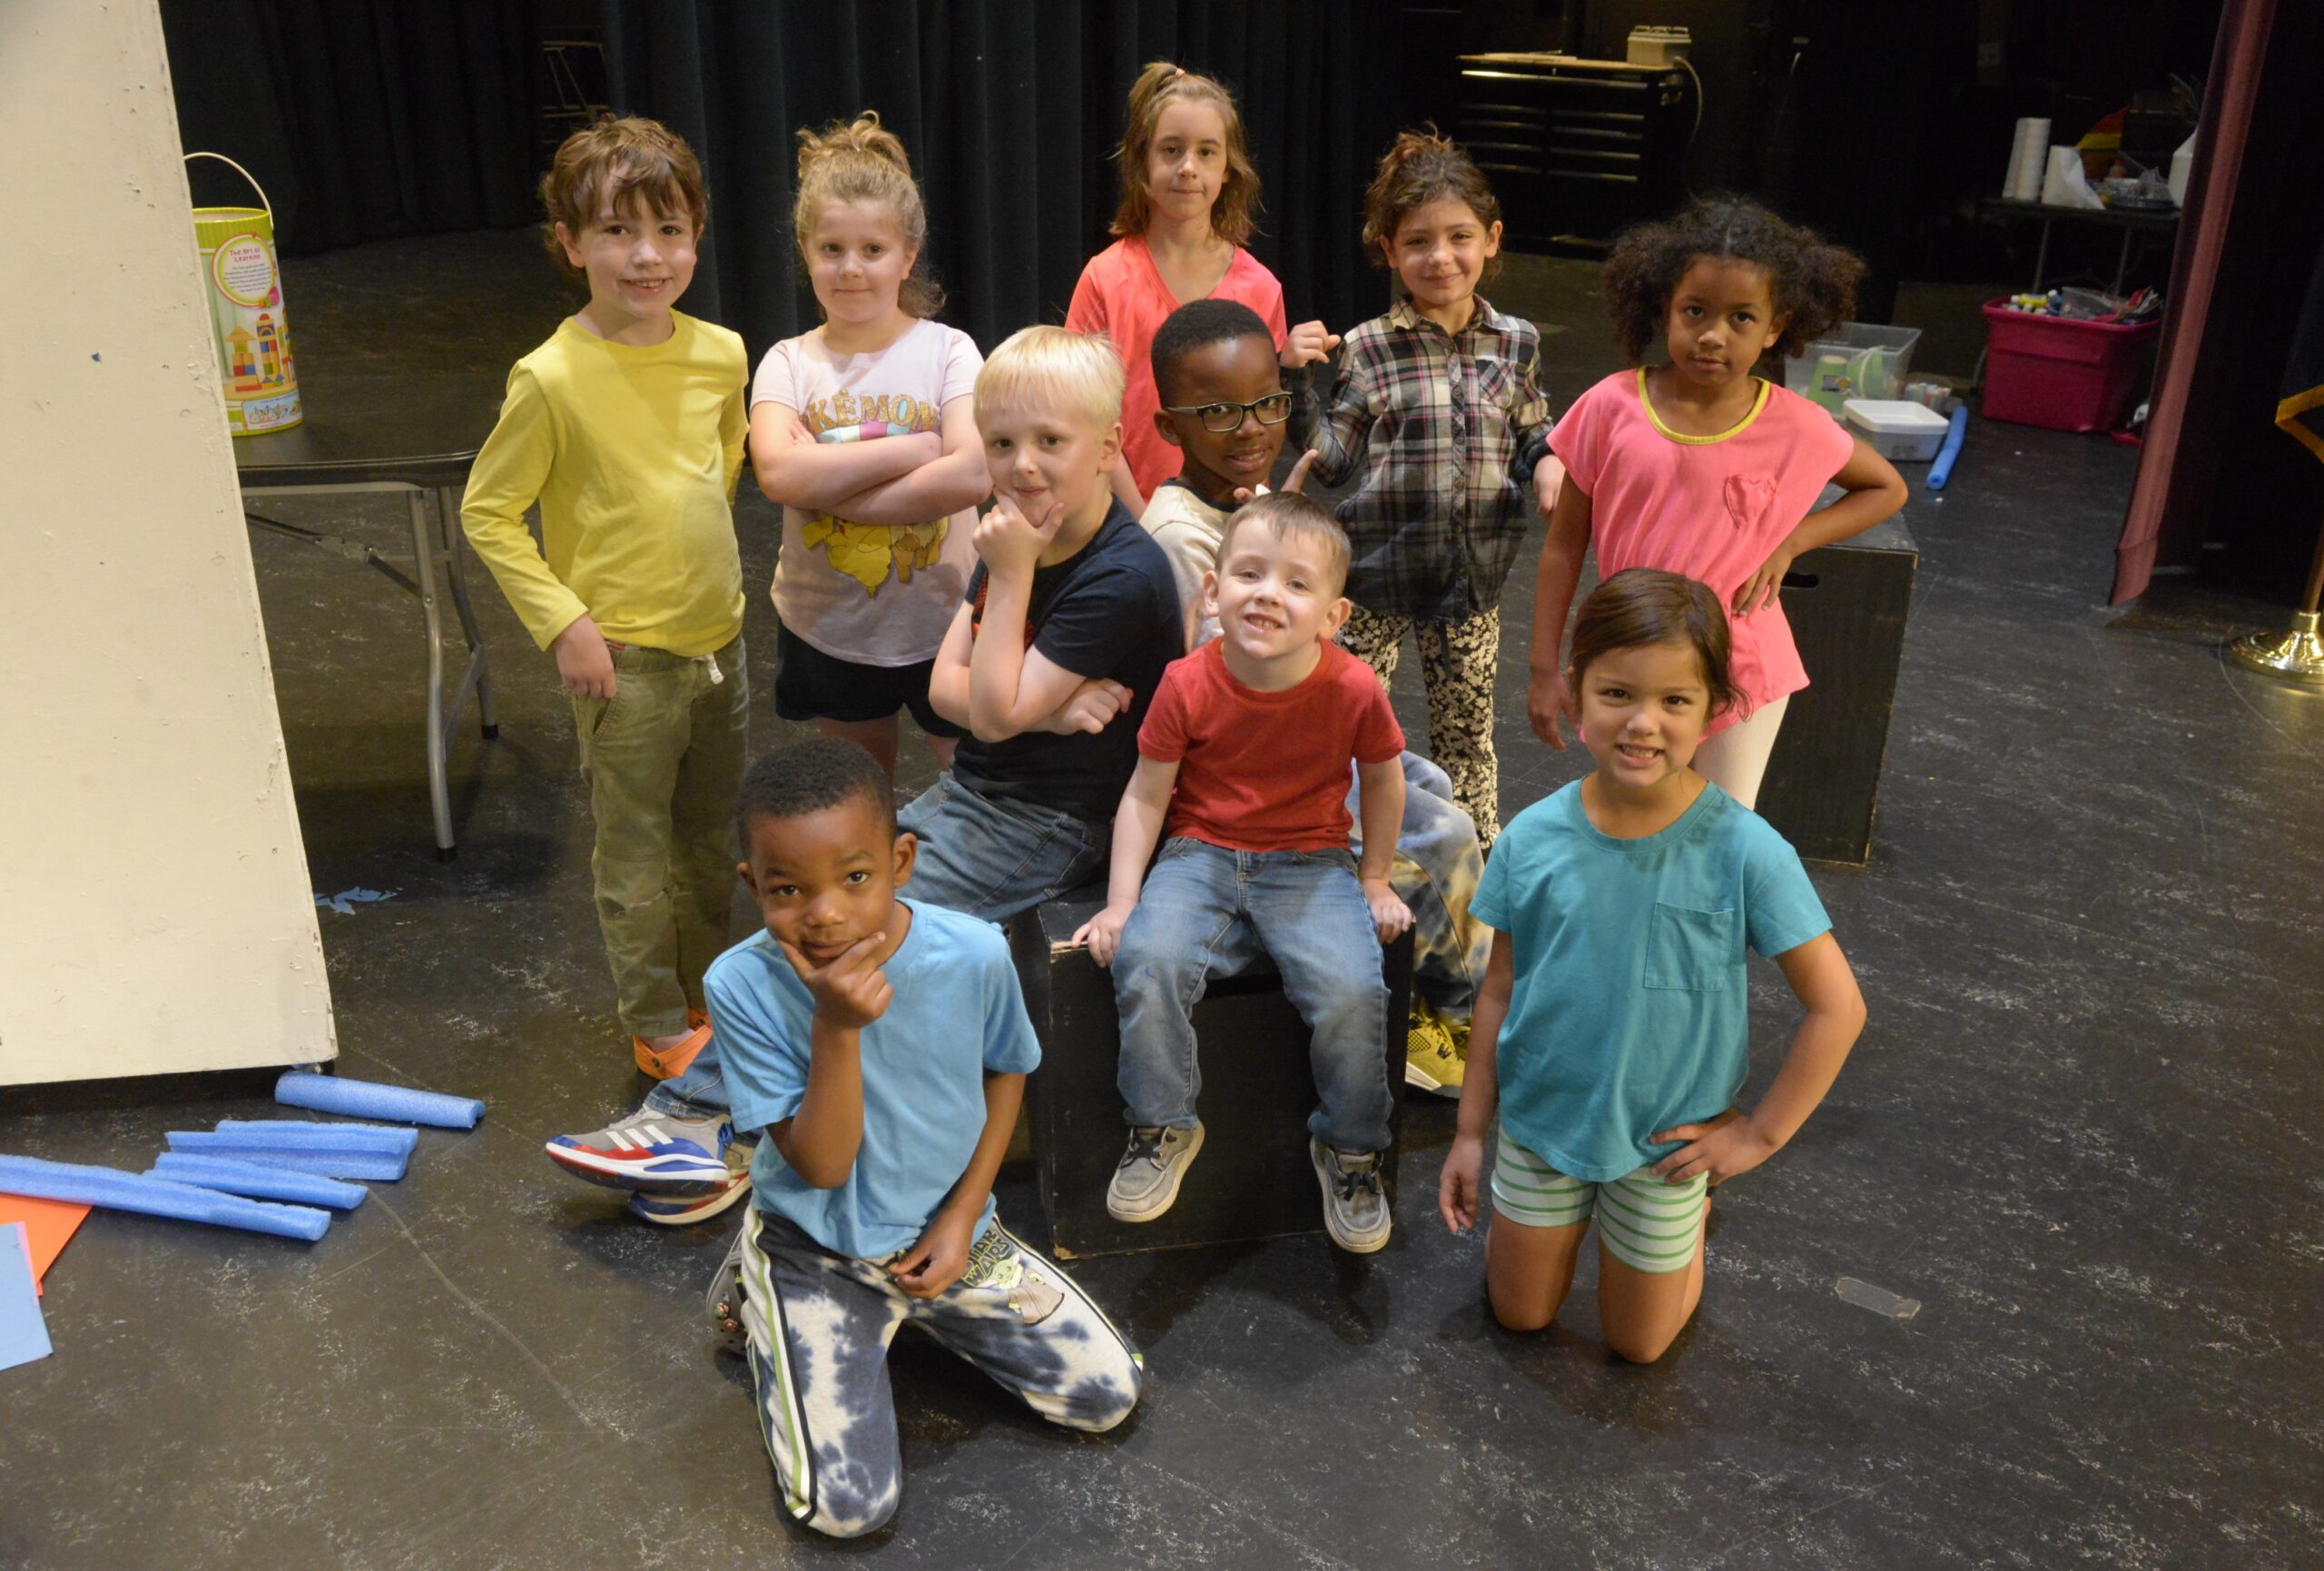 Budding Actors: Theatre Camps Provide Summer Fun and Learning